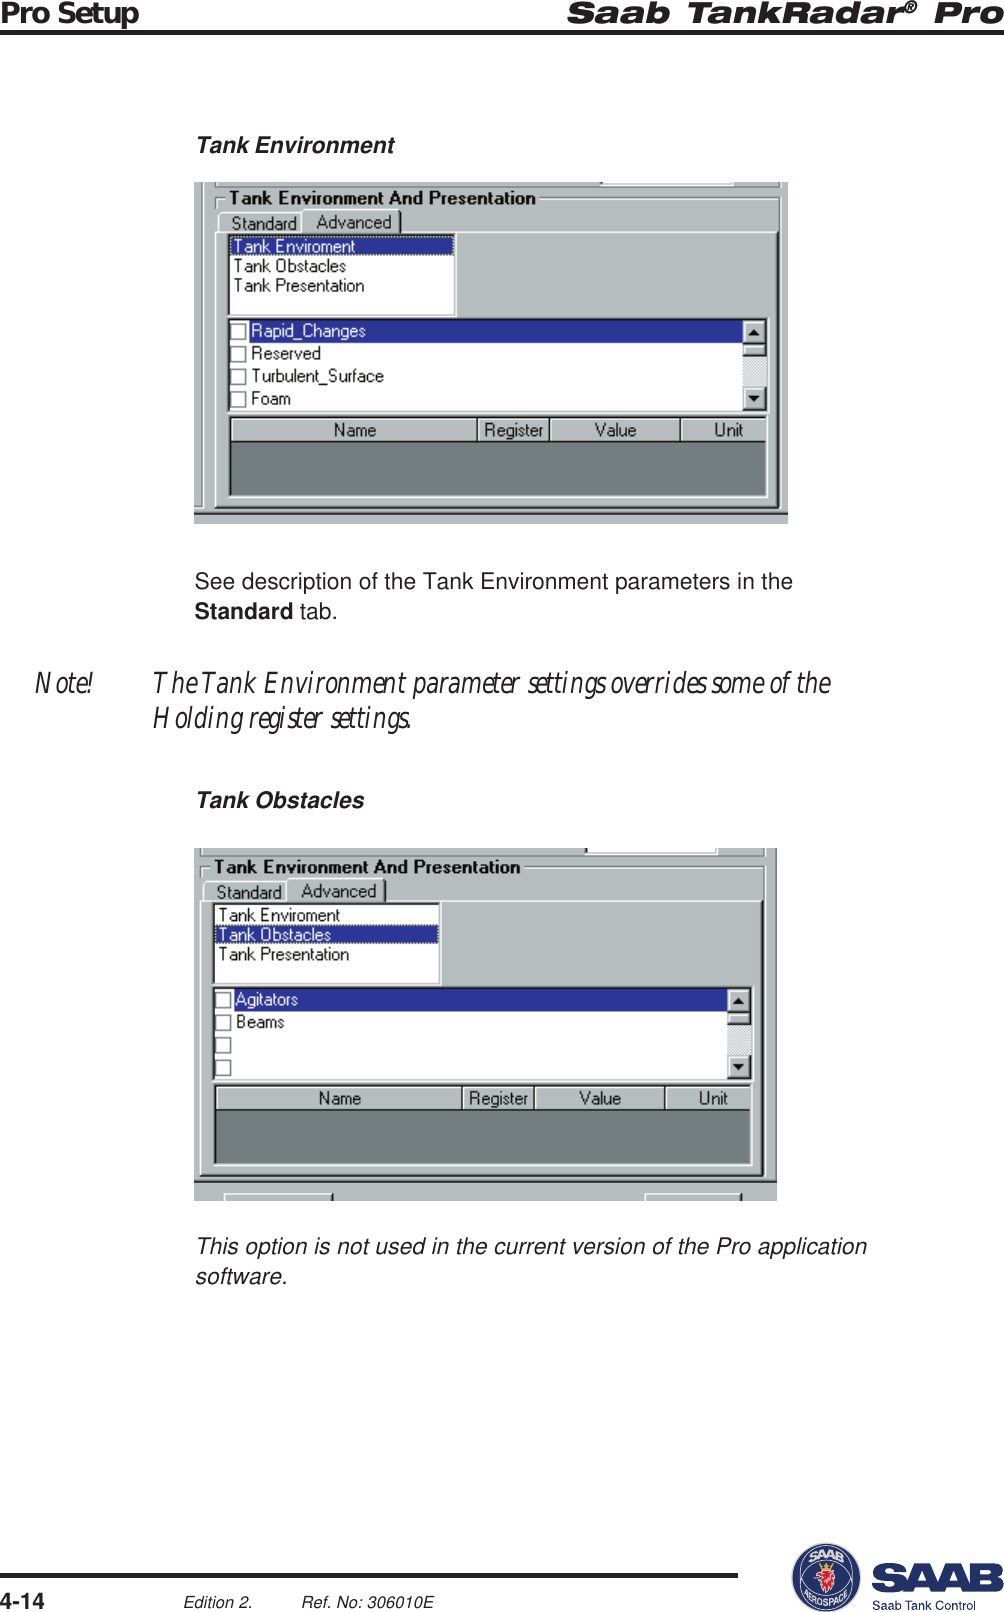 Saab TankRadar® ProPro Setup4-14Edition 2. Ref. No: 306010ESee description of the Tank Environment parameters in theStandard tab.Note! The Tank Environment parameter settings overrides some of theHolding register settings.Tank ObstaclesTank EnvironmentThis option is not used in the current version of the Pro applicationsoftware.